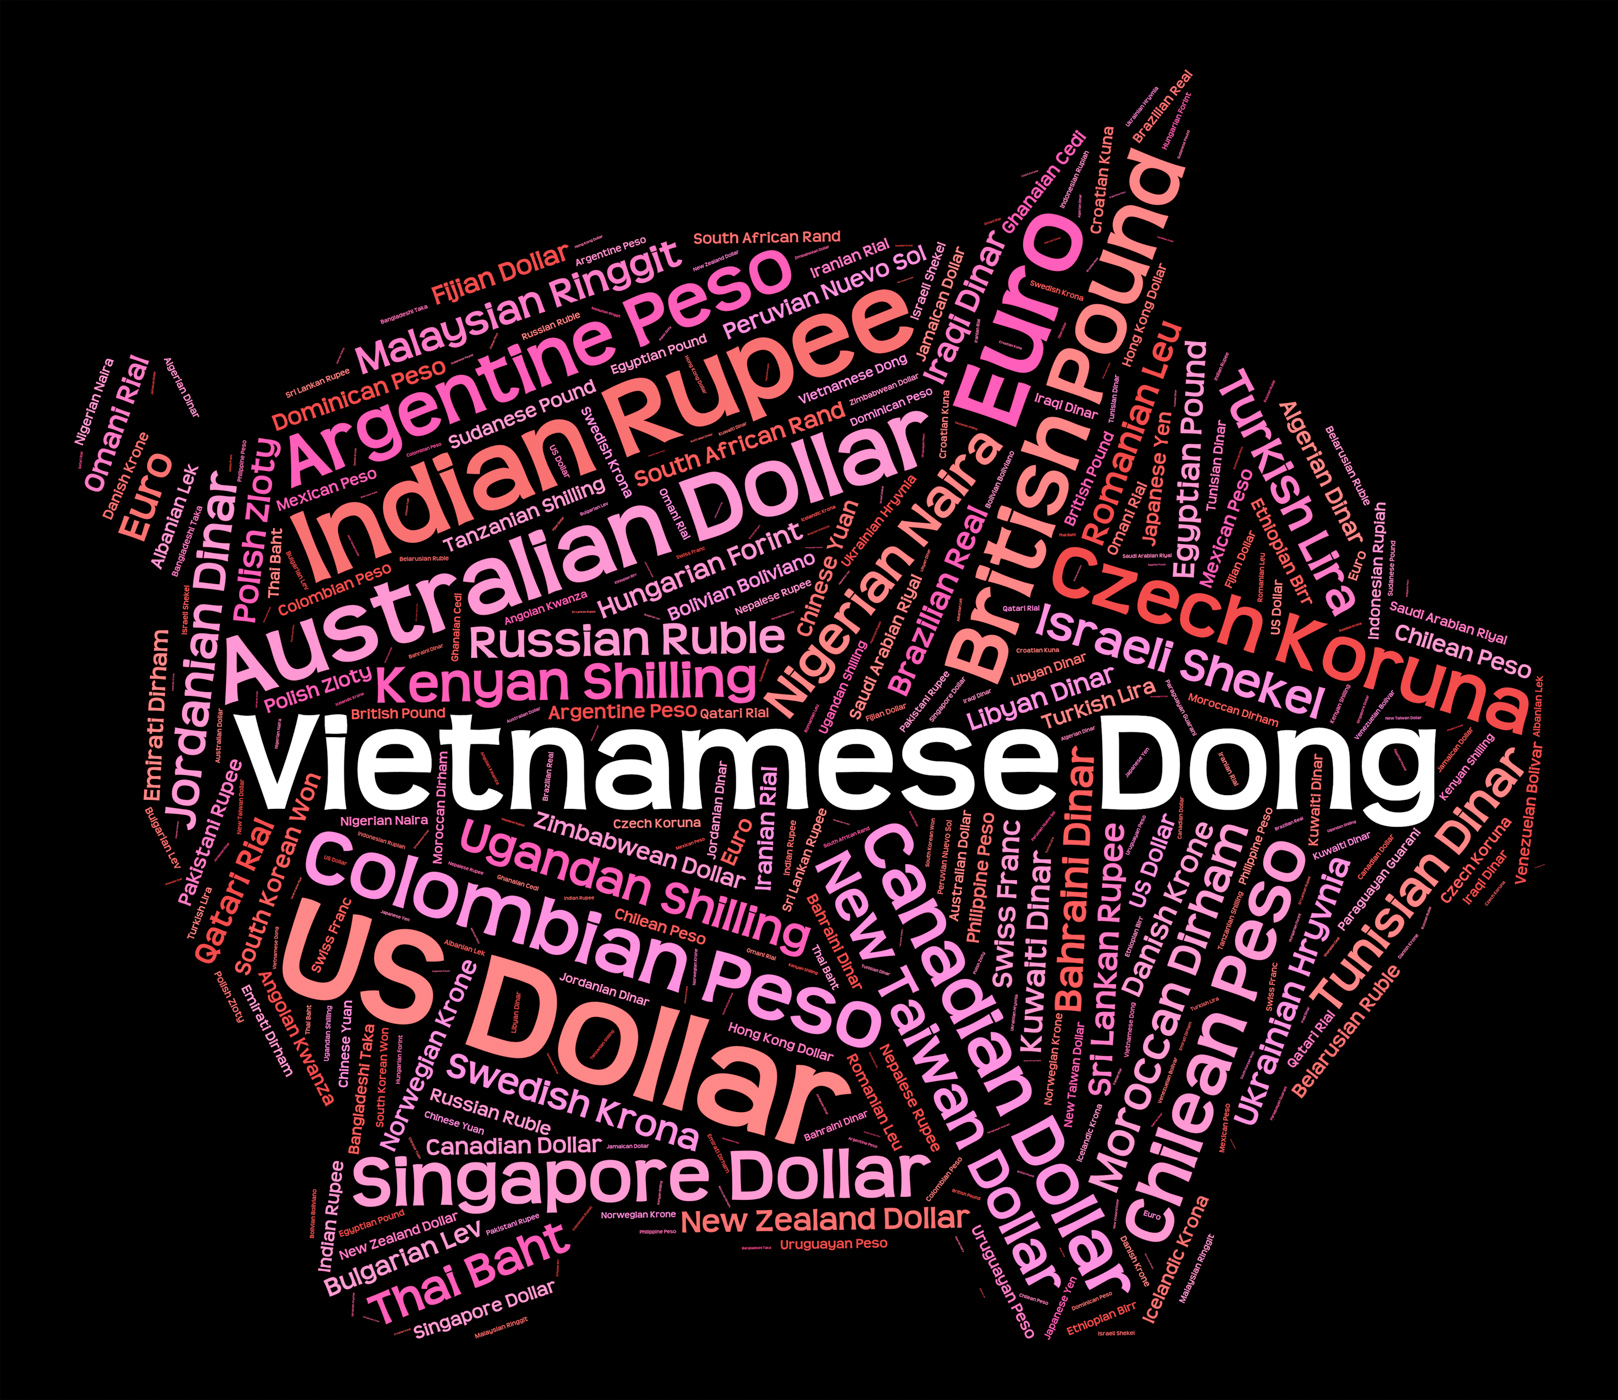 Vietnamese dong means currency exchange and broker photo